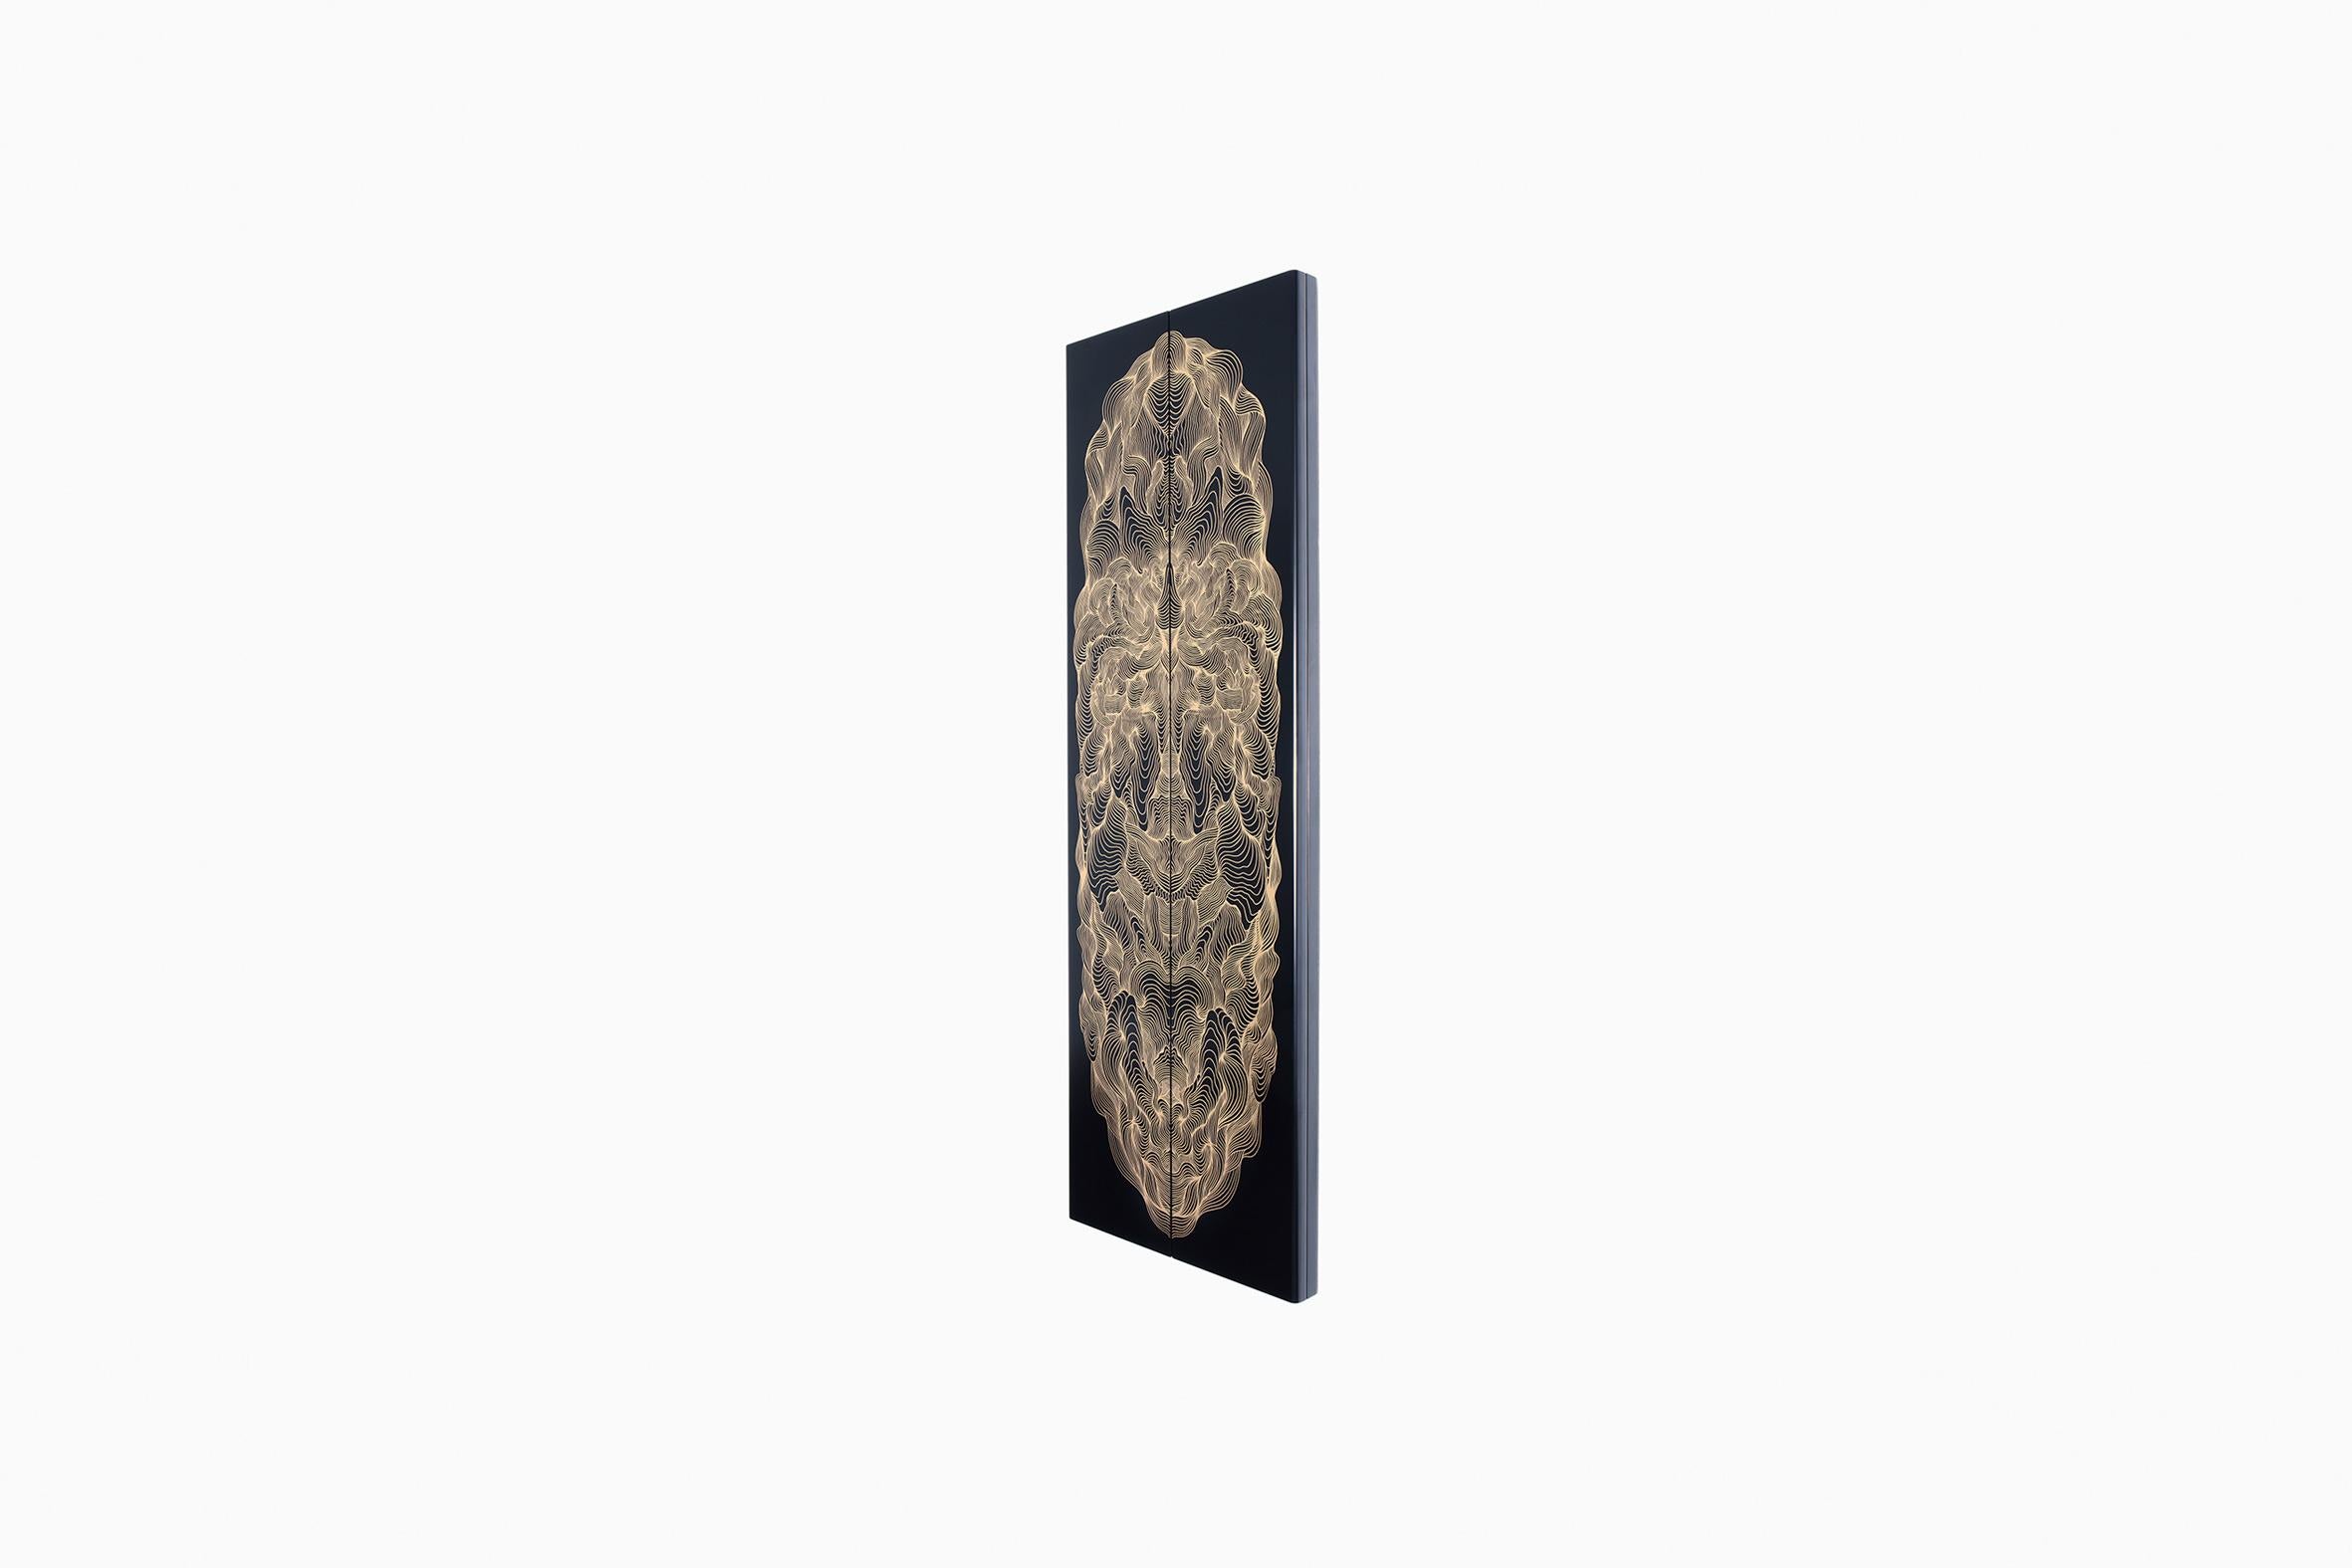 The idea was to commission Joan Tarragó to illustrate the doors of a triptych mirror. The Chinoiserie then came to mind. Chinese lacquer and its filigree drawings with golden motifs, which he transformed into his own language. The essence of